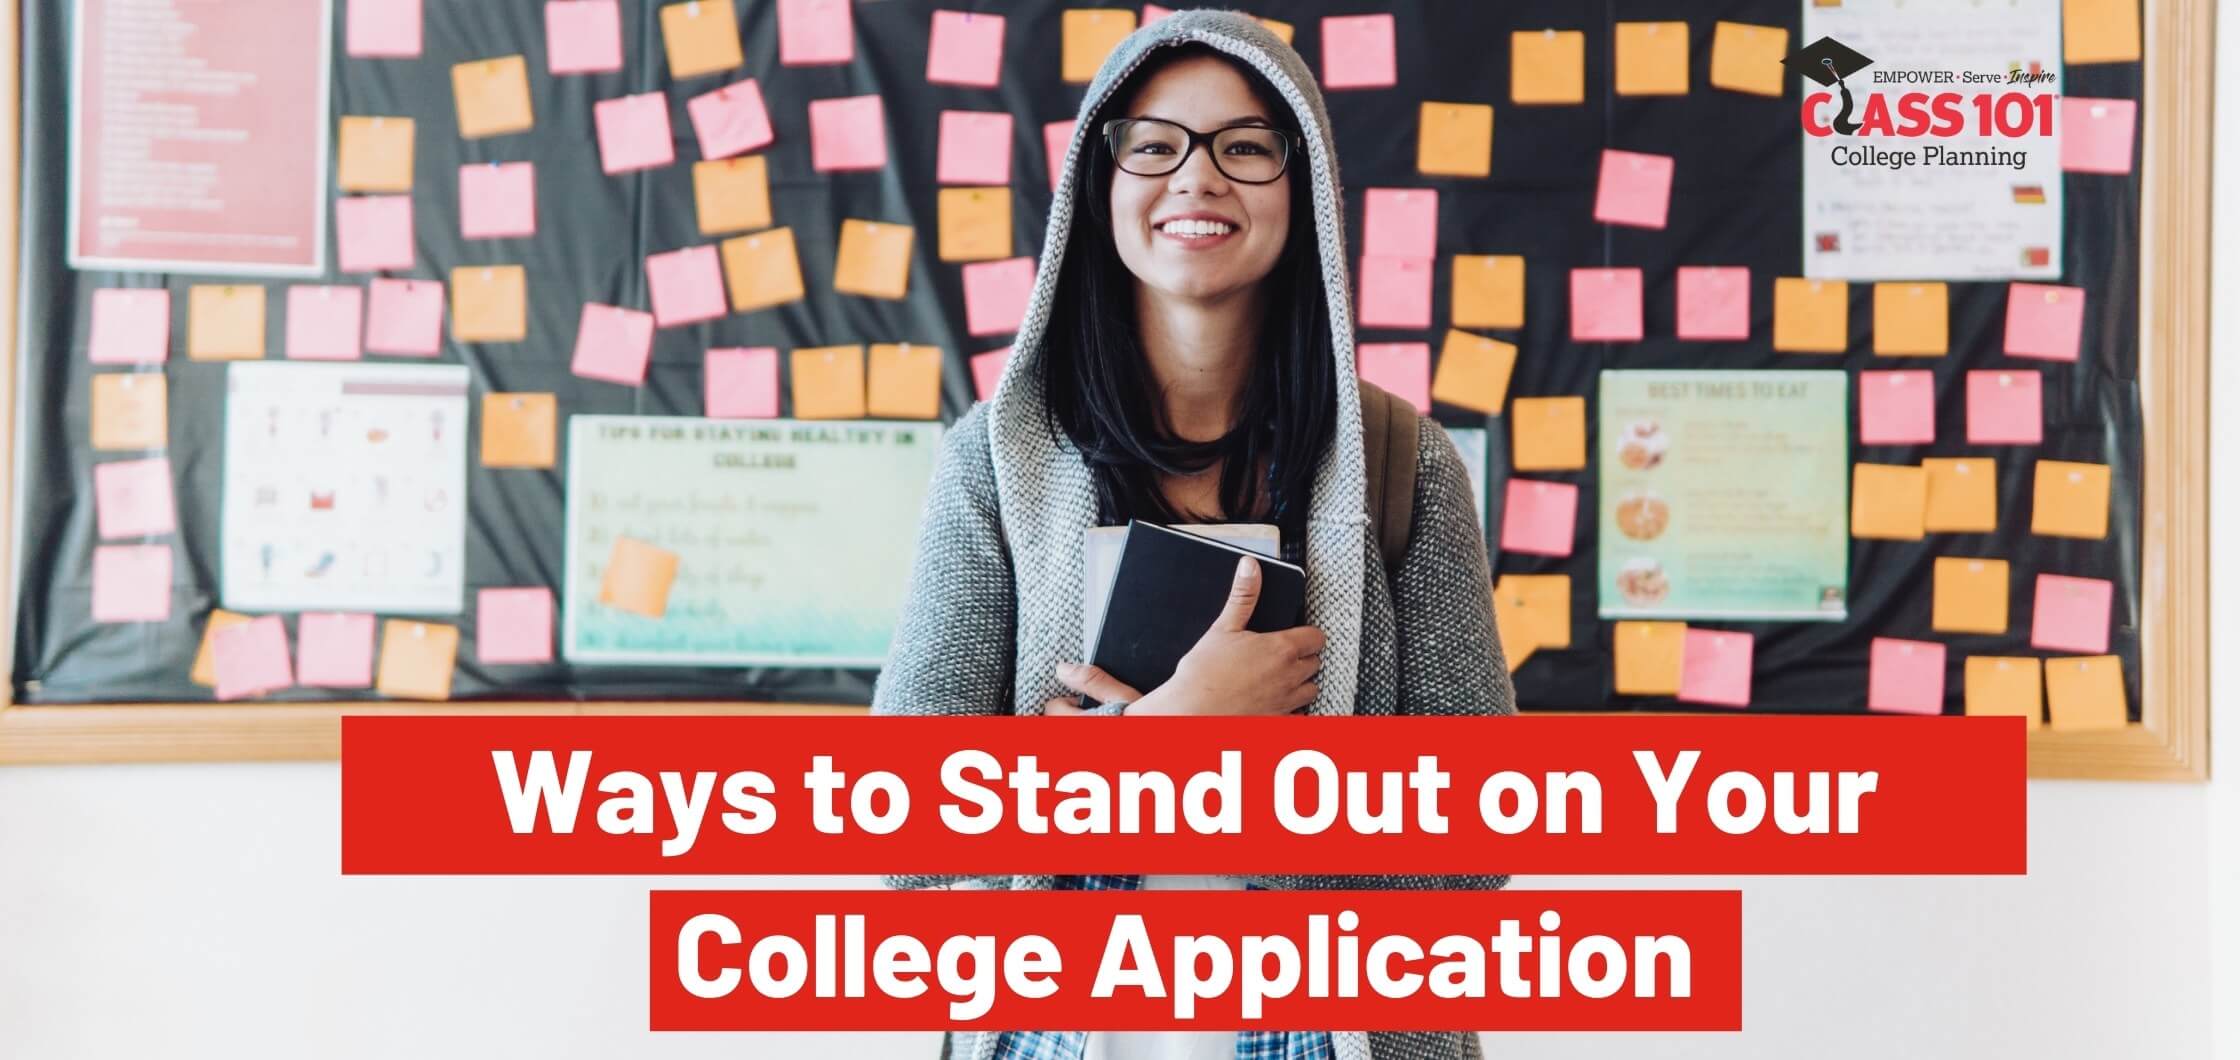 Ways to Stand Out on Your College Application